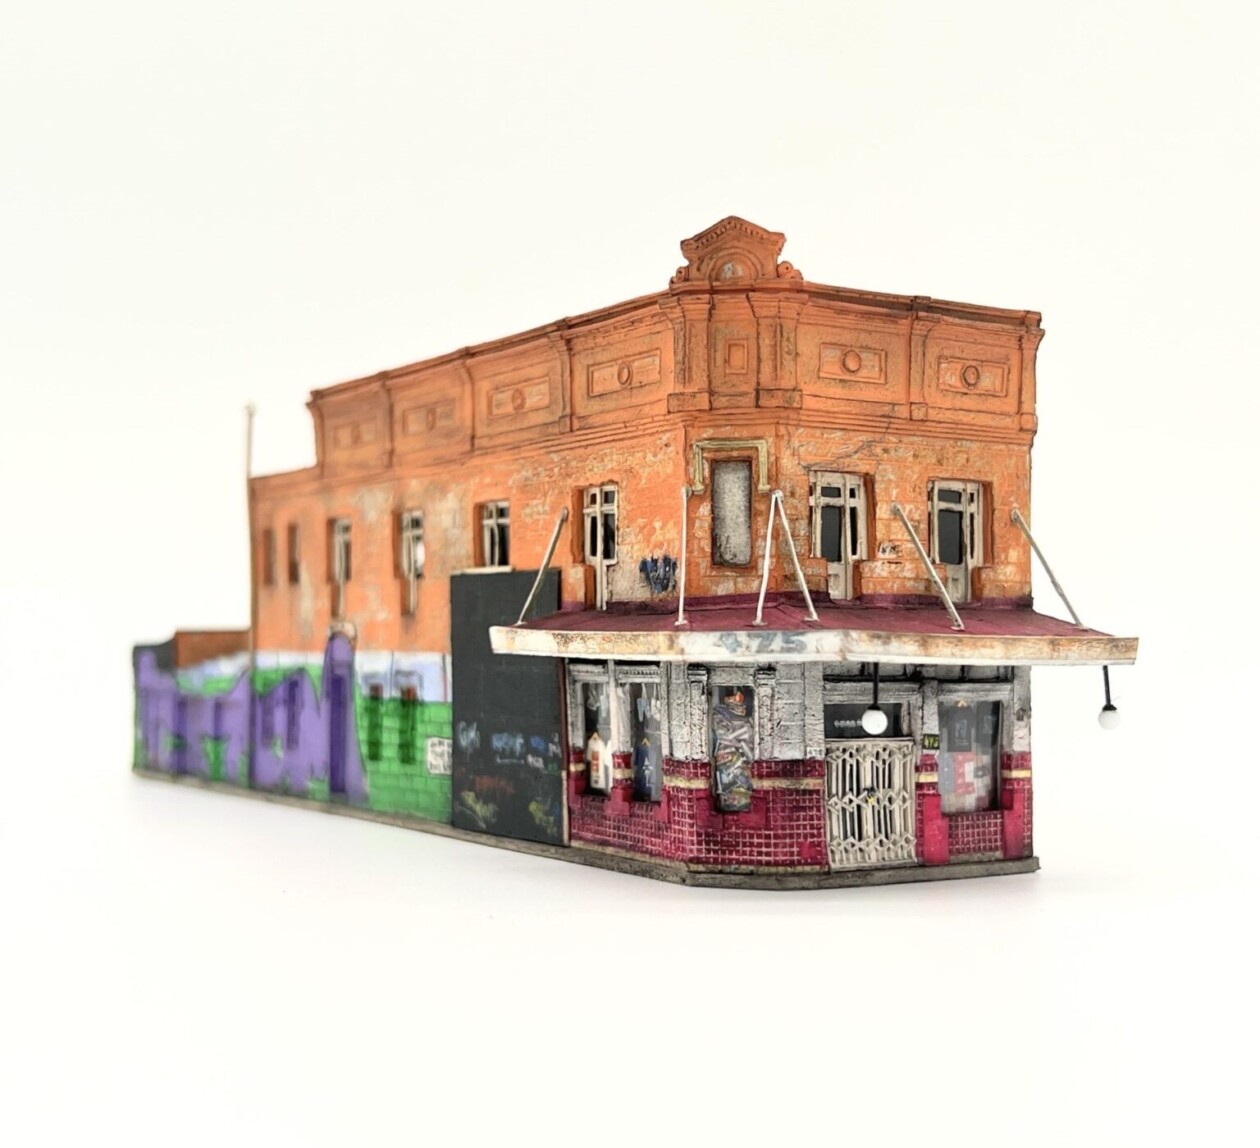 Whimsical Everyday Life And Historical Buildings In Miniature By Mylyn Nguyen (9)